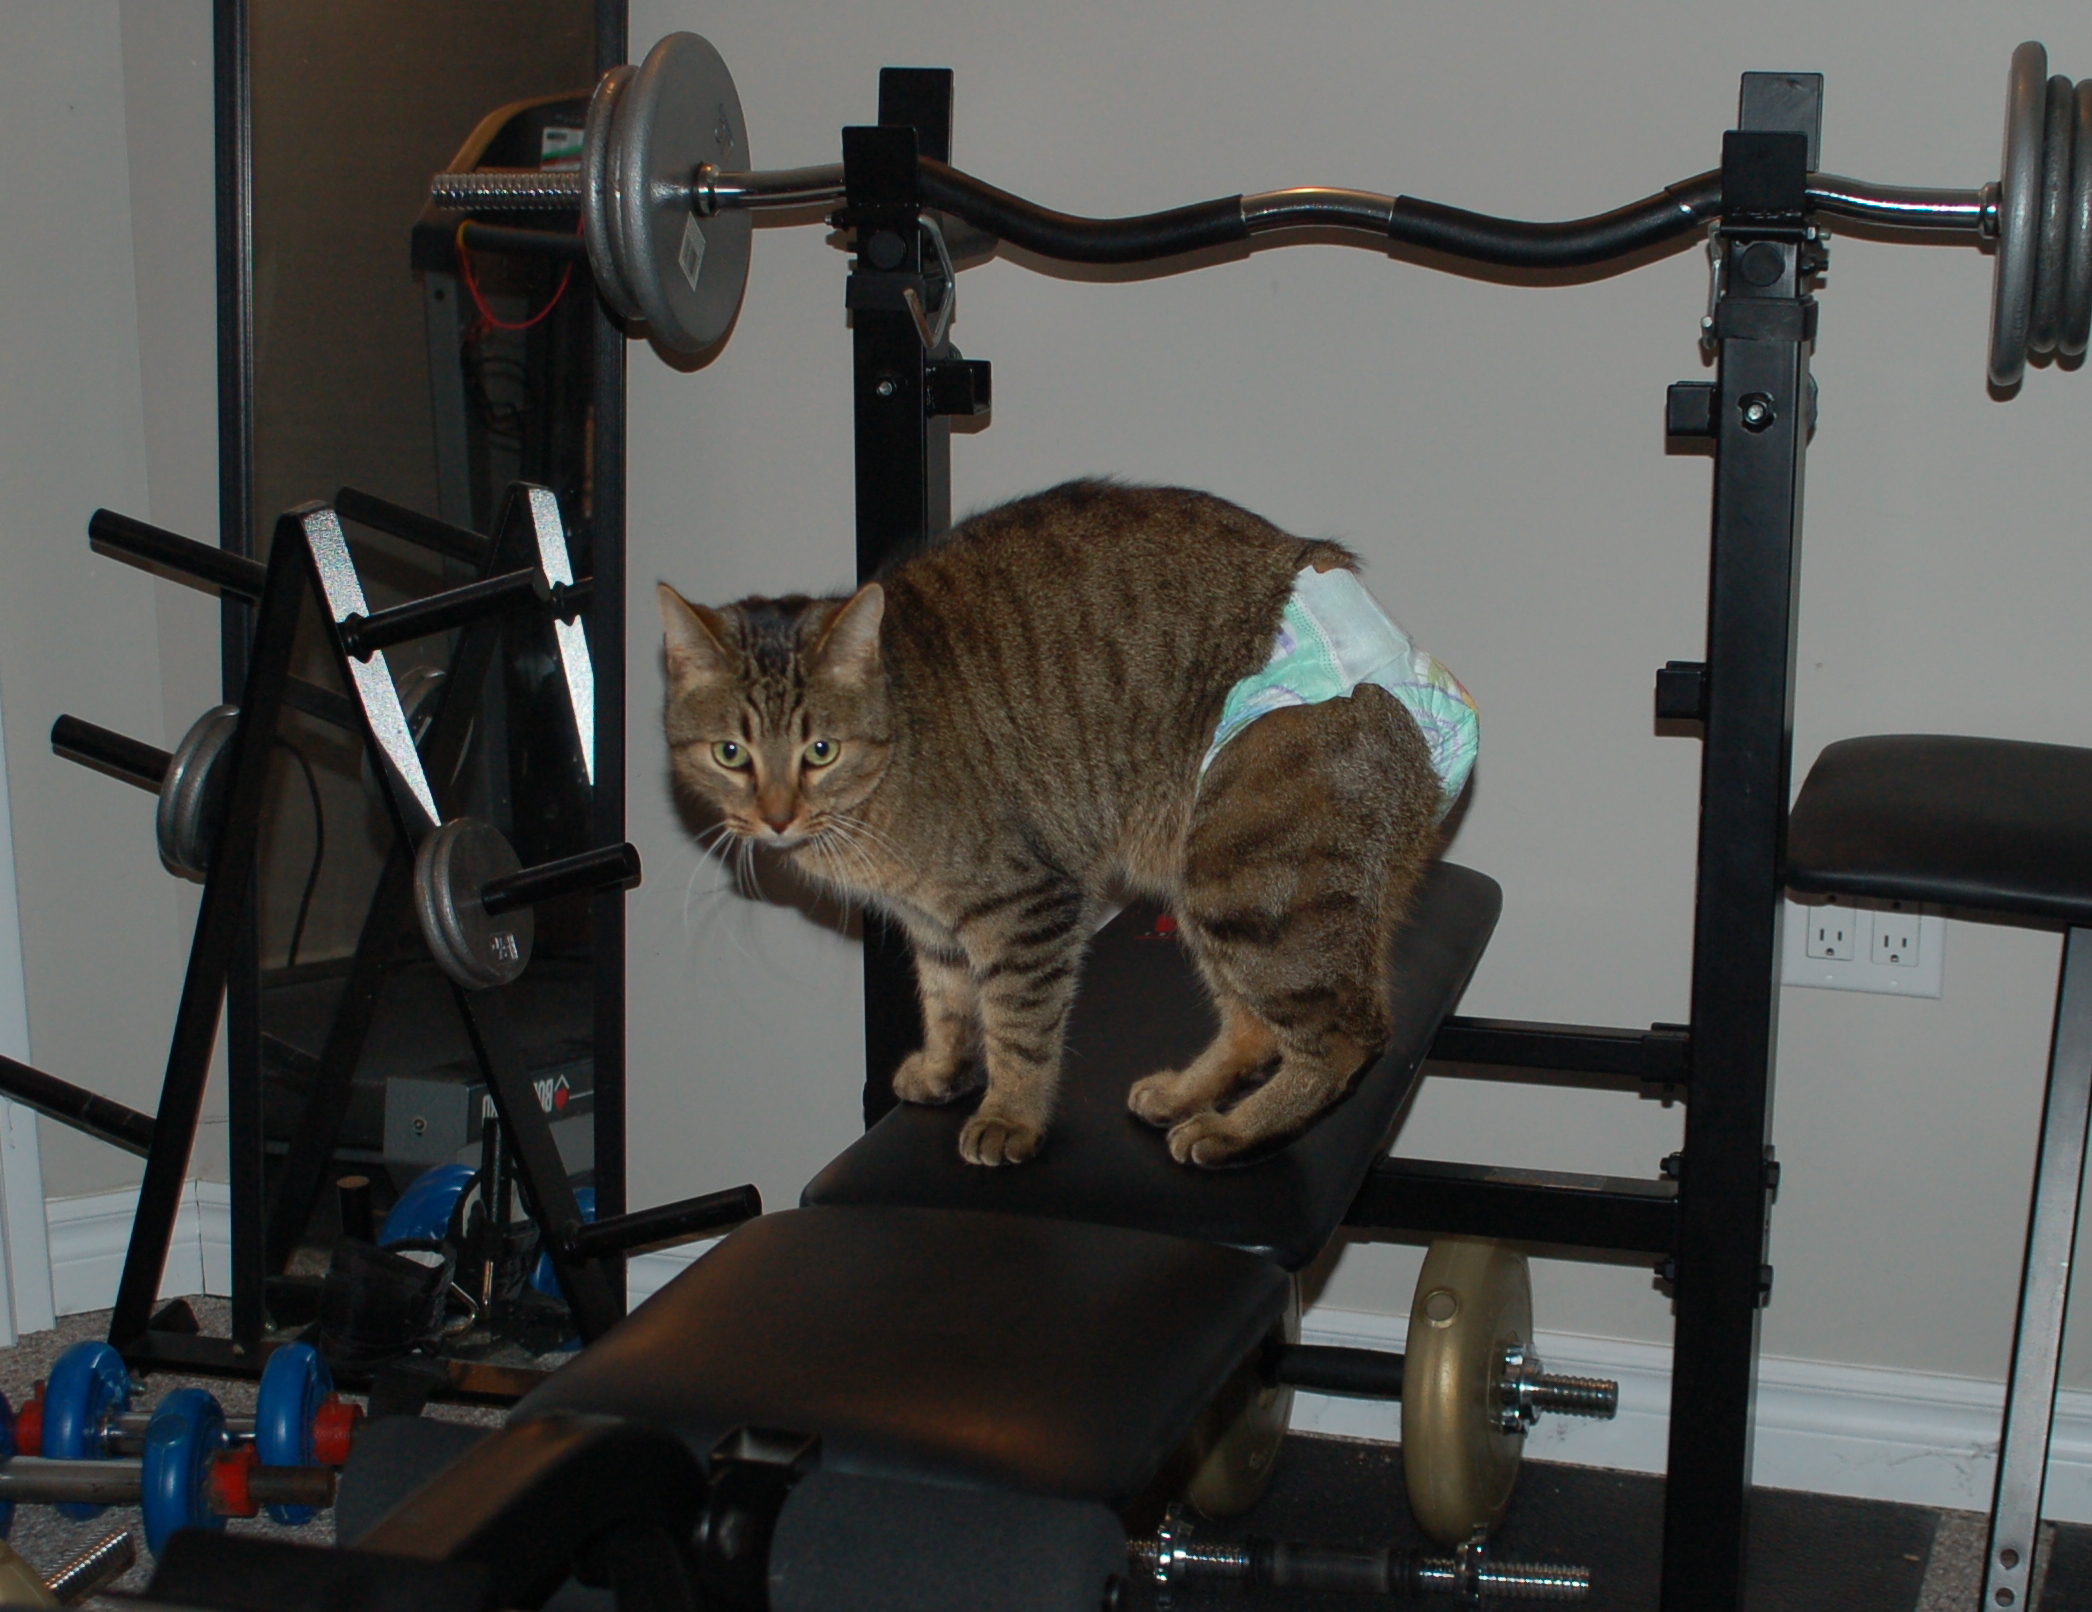 Clinck the cat wearing a diaper and standing on gym equipment